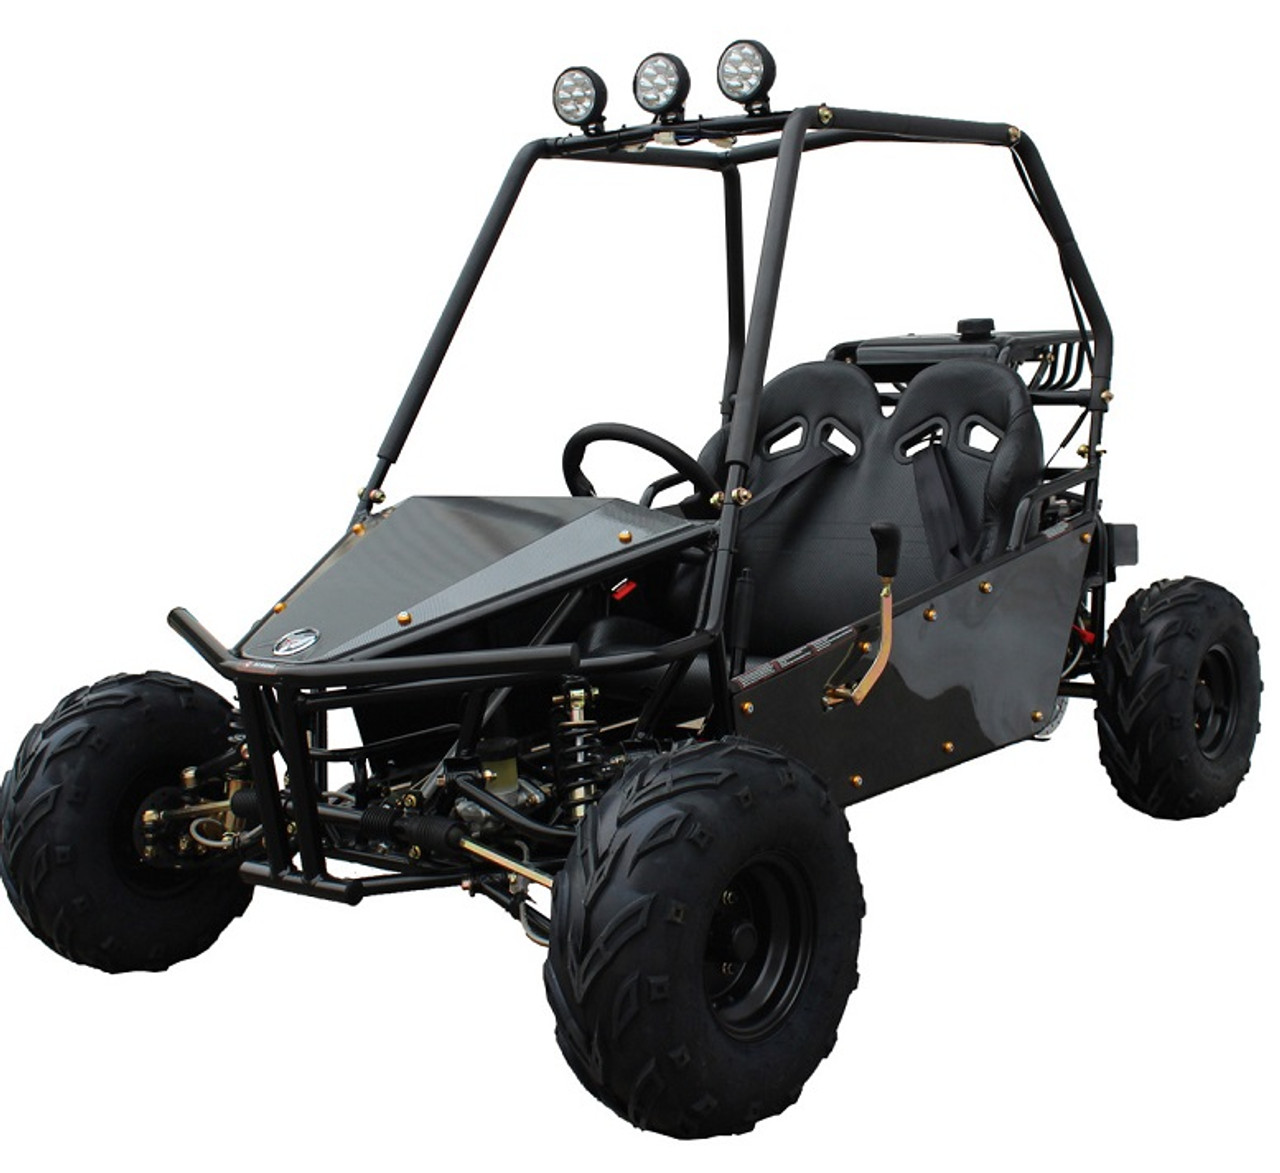 Buy New Massimo GKM-125 Go Kart, Available in crate for Online sale.